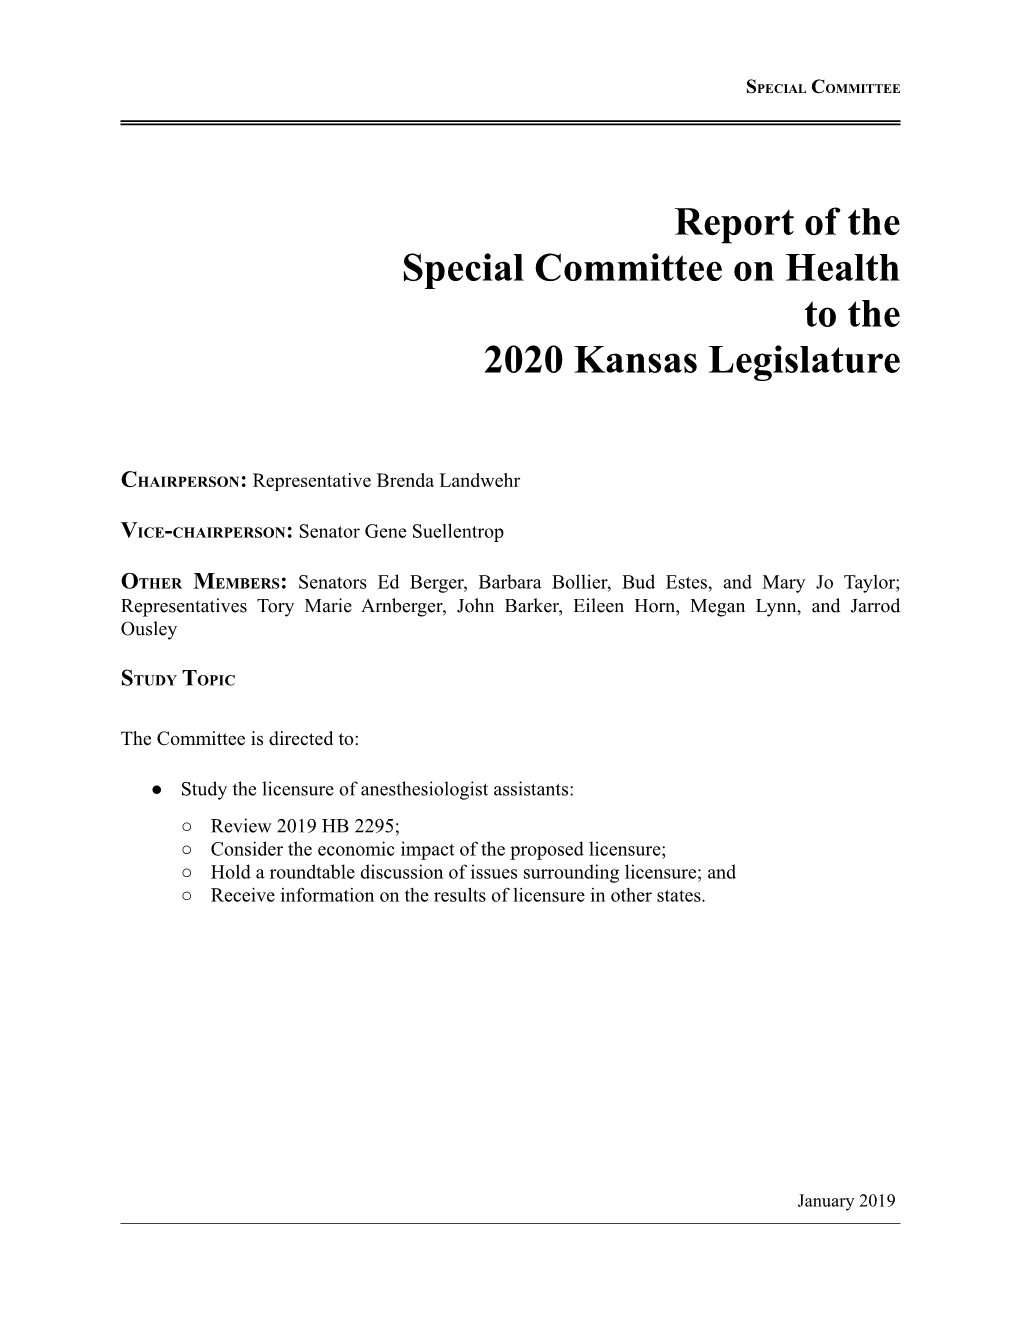 Report of the Special Committee on Health to the 2020 Kansas Legislature